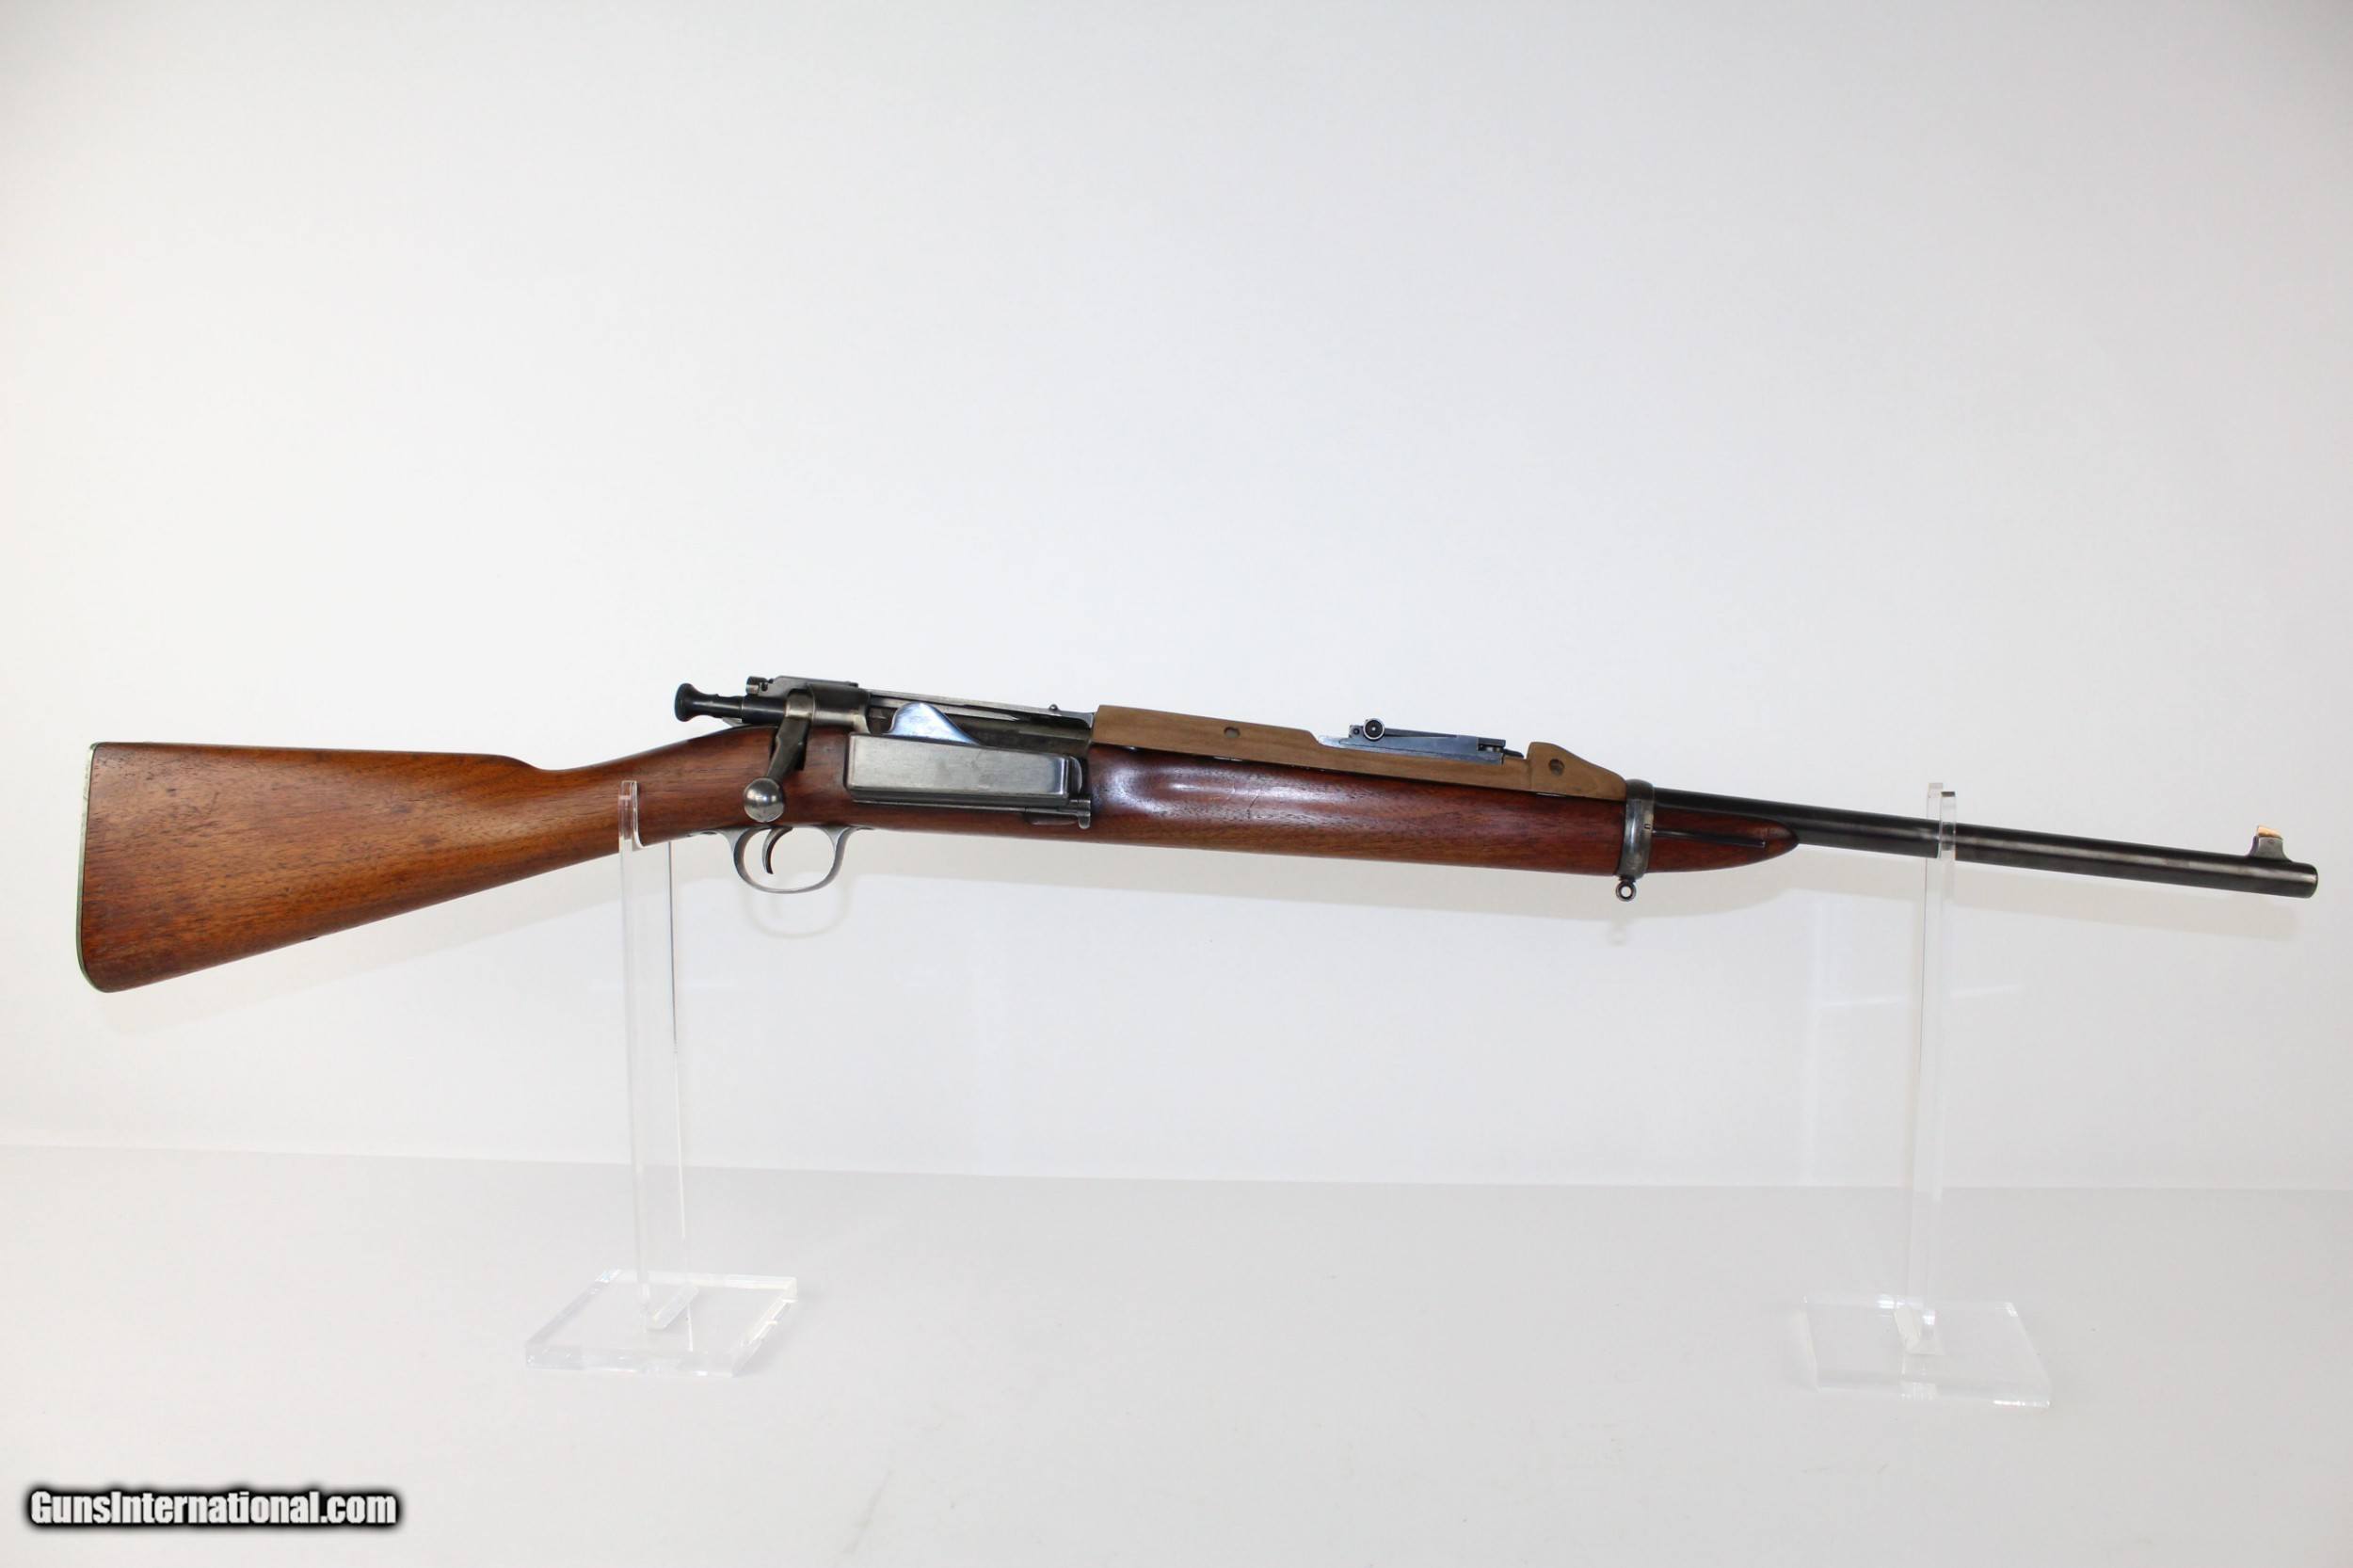 search springfield model 1898 rifle by serial number